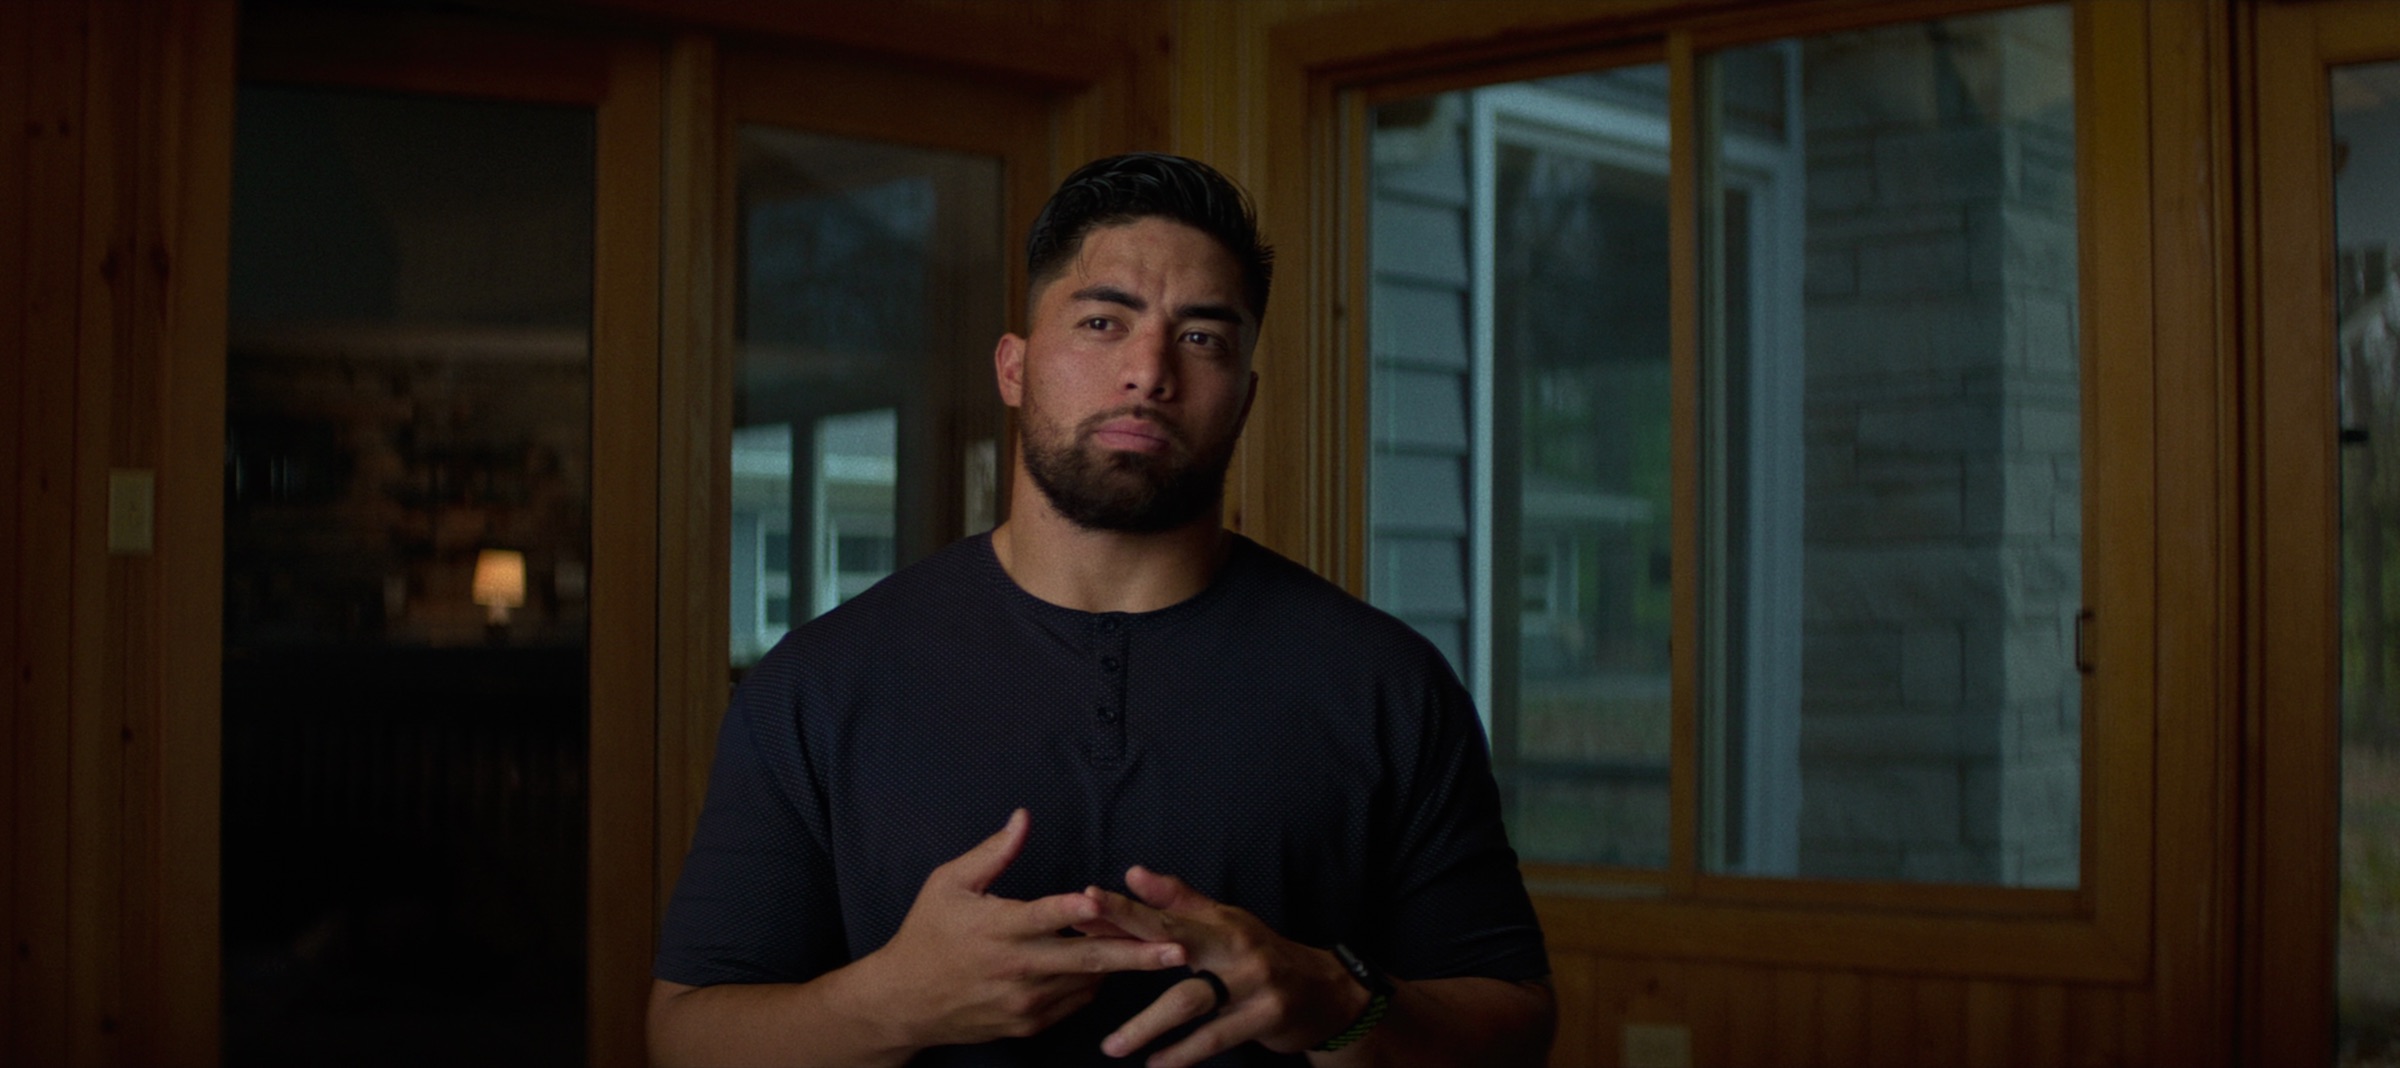 Manti T'eo speaking out in 'Untold' (Courtesy of Netflix)